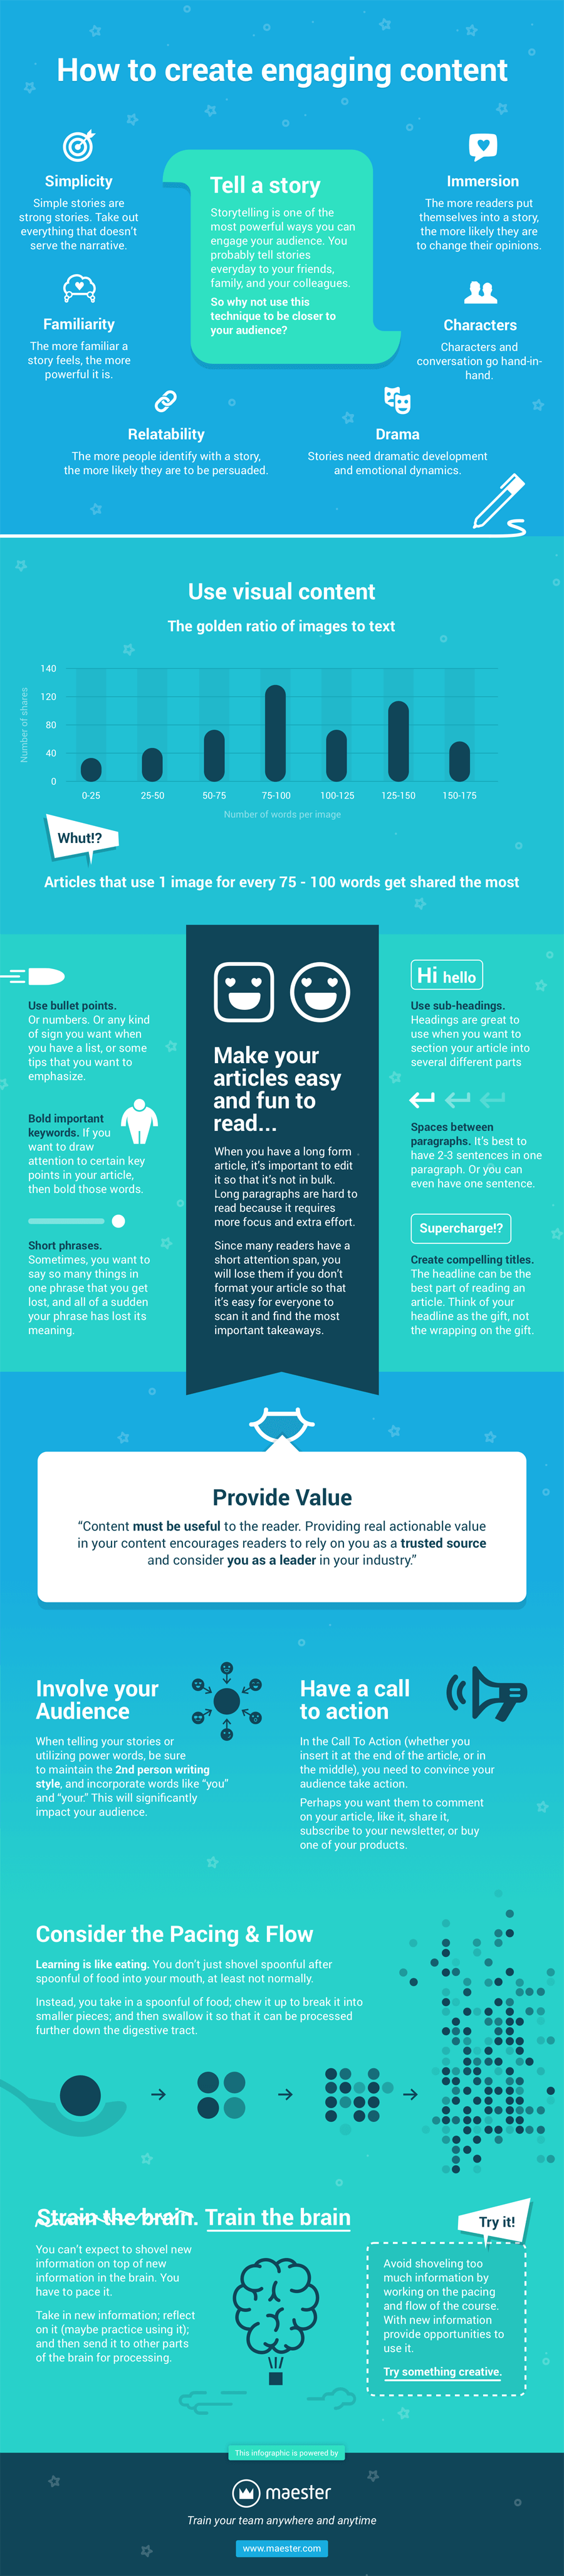 How to Create Engaging Content - #infographic